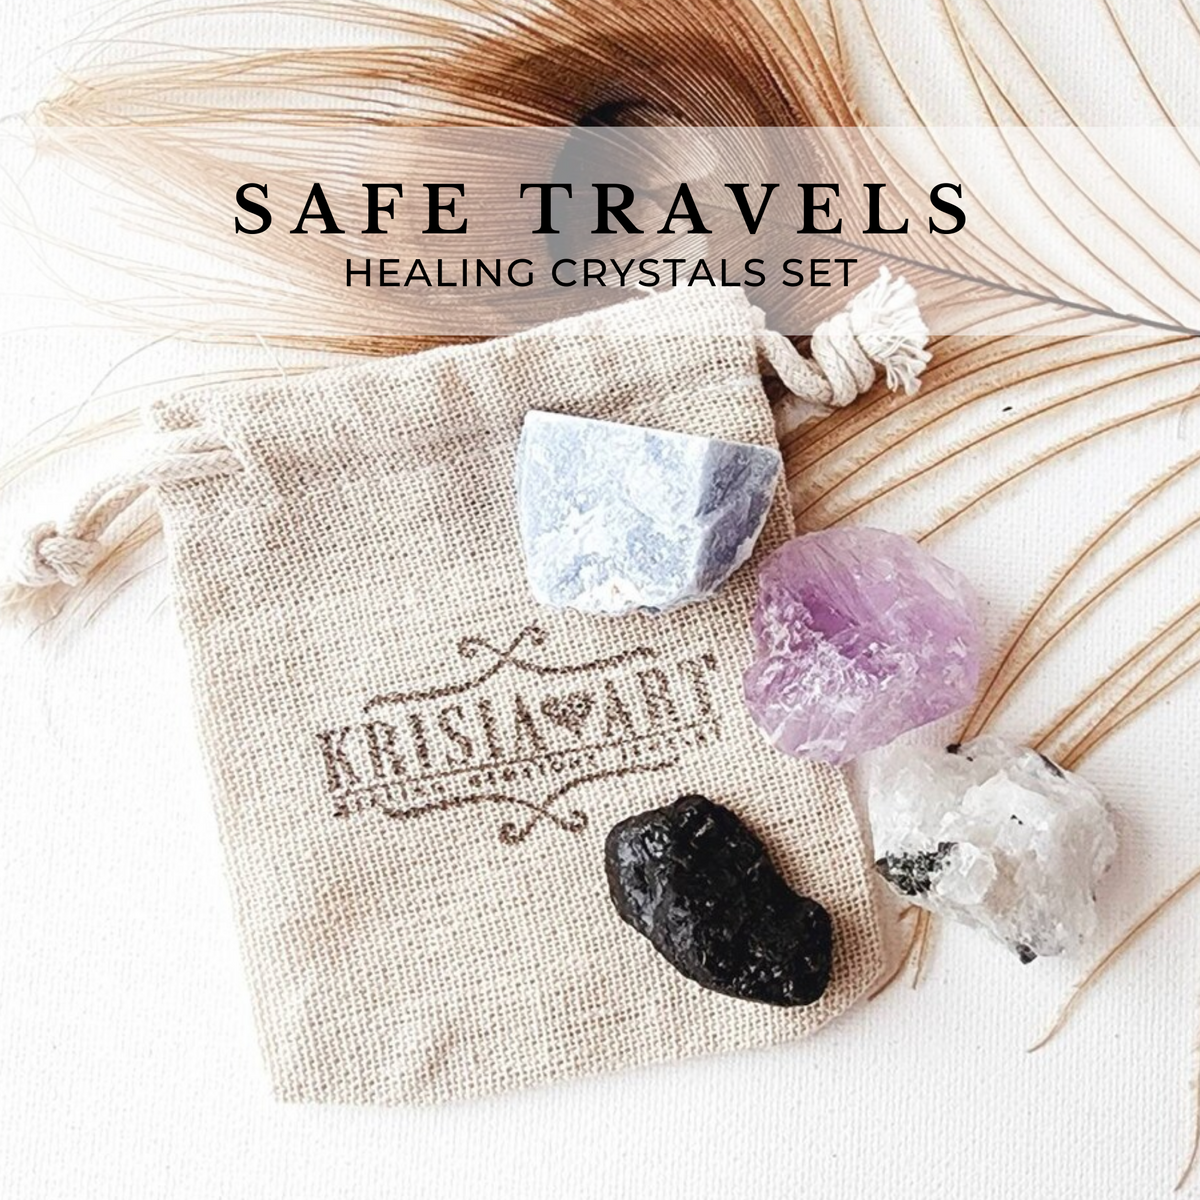 SAFE TRAVELS crystal set for protection, peace, safety, calming anxiety traveling. Amethyst, Rainbow Moonstone, Black Tourmaline, and Angelite